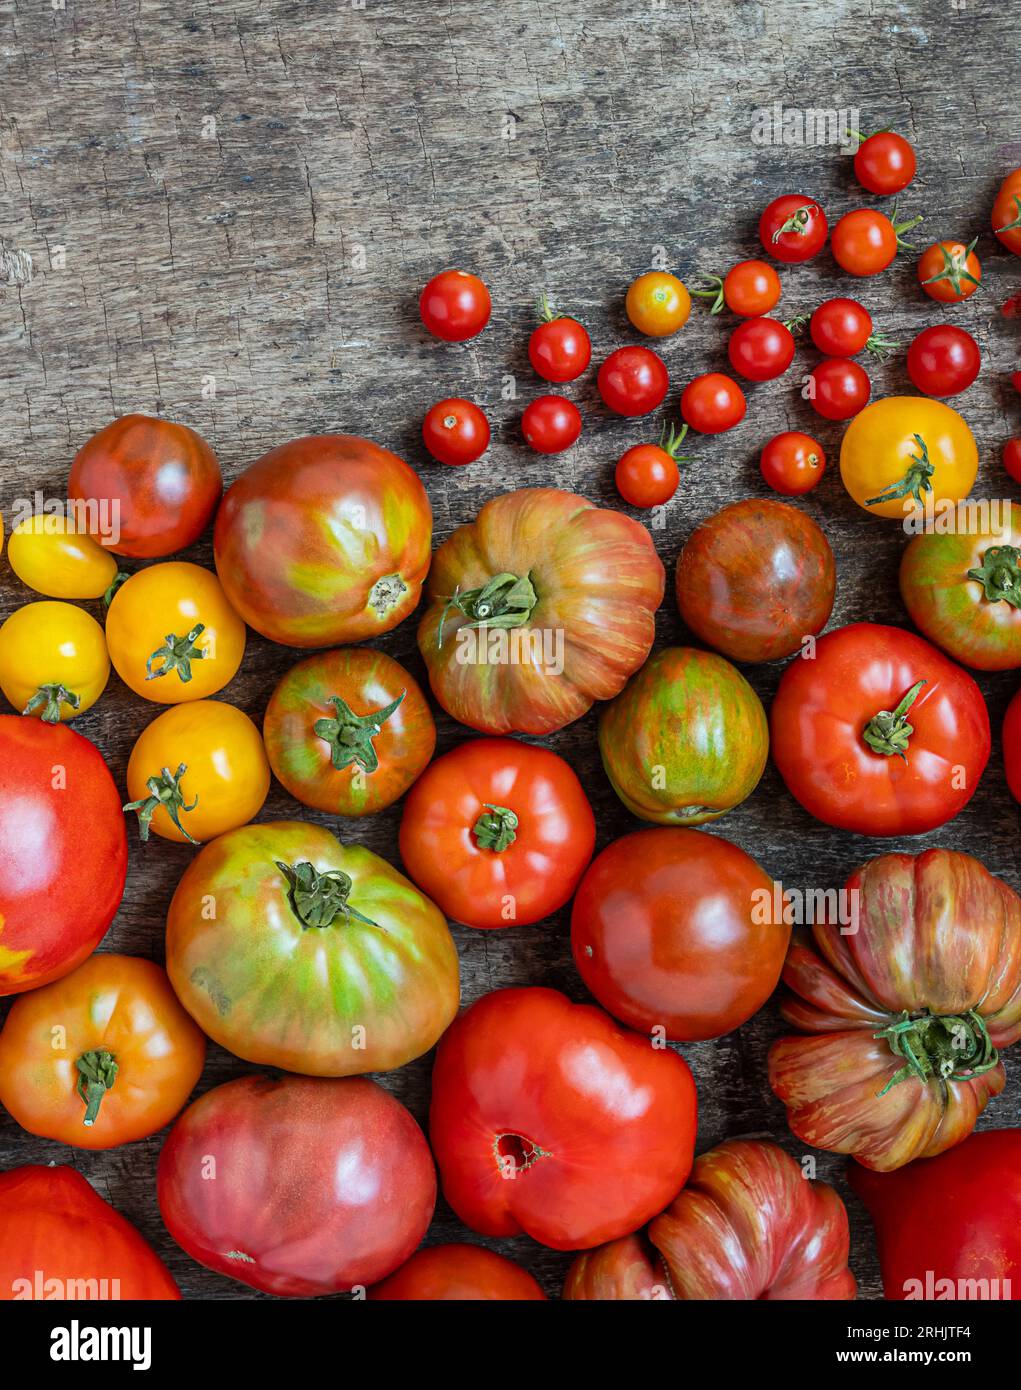 Variety of organic untreated tomatoes as grow your own food and harvest conception Stock Photo